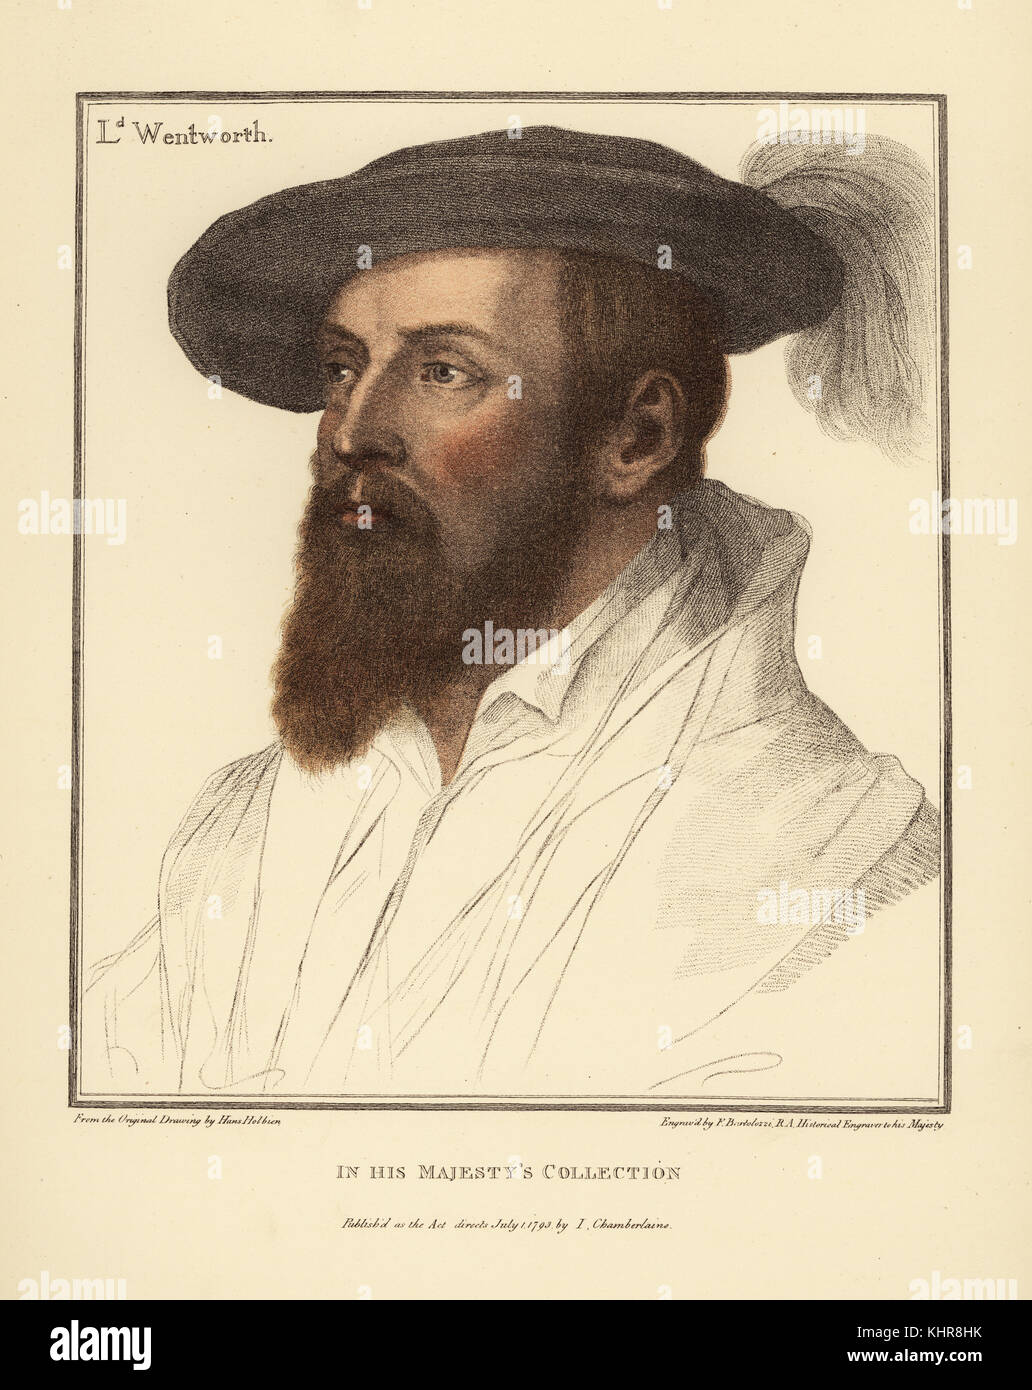 Thomas Wentworth, 1st Baron Wentworth, 6th Baron le Despencer (1501-1551), English peer and courtier. Handcoloured copperplate engraving by Francis Bartolozzi after Hans Holbein from Facsimiles of Original Drawings by Hans Holbein, Hamilton, Adams, London, 1884. Stock Photo